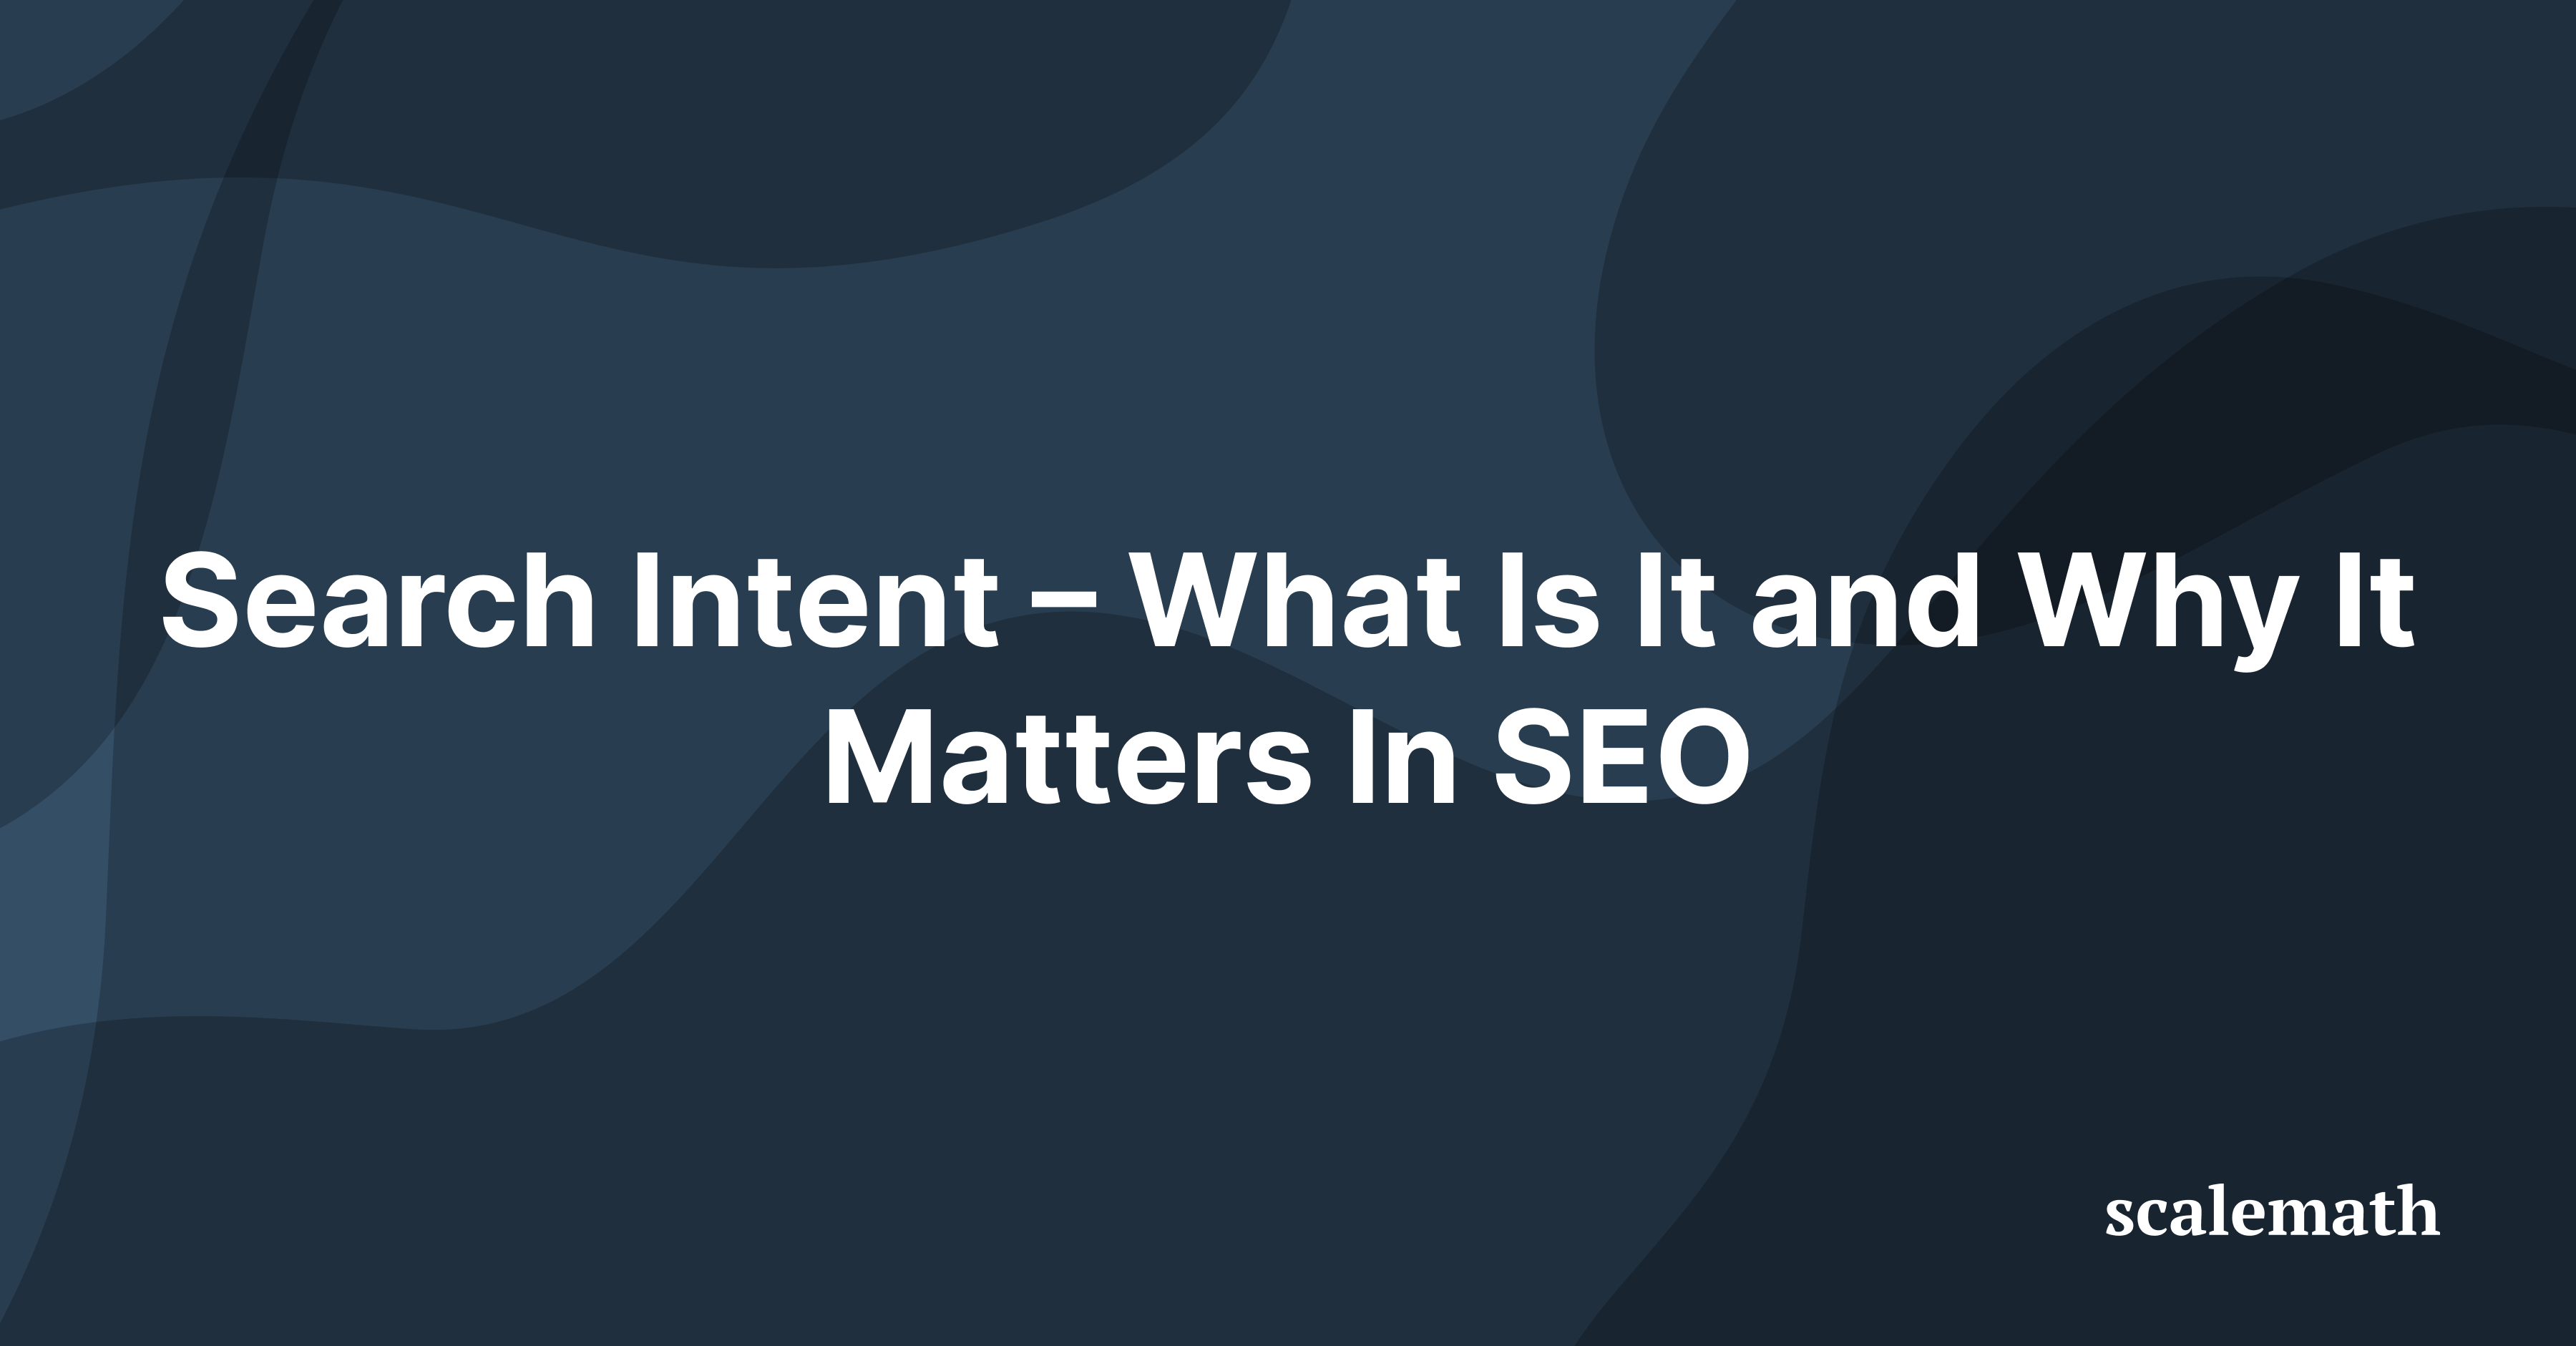 Search Intent – What Is It and Why It Matters In SEO